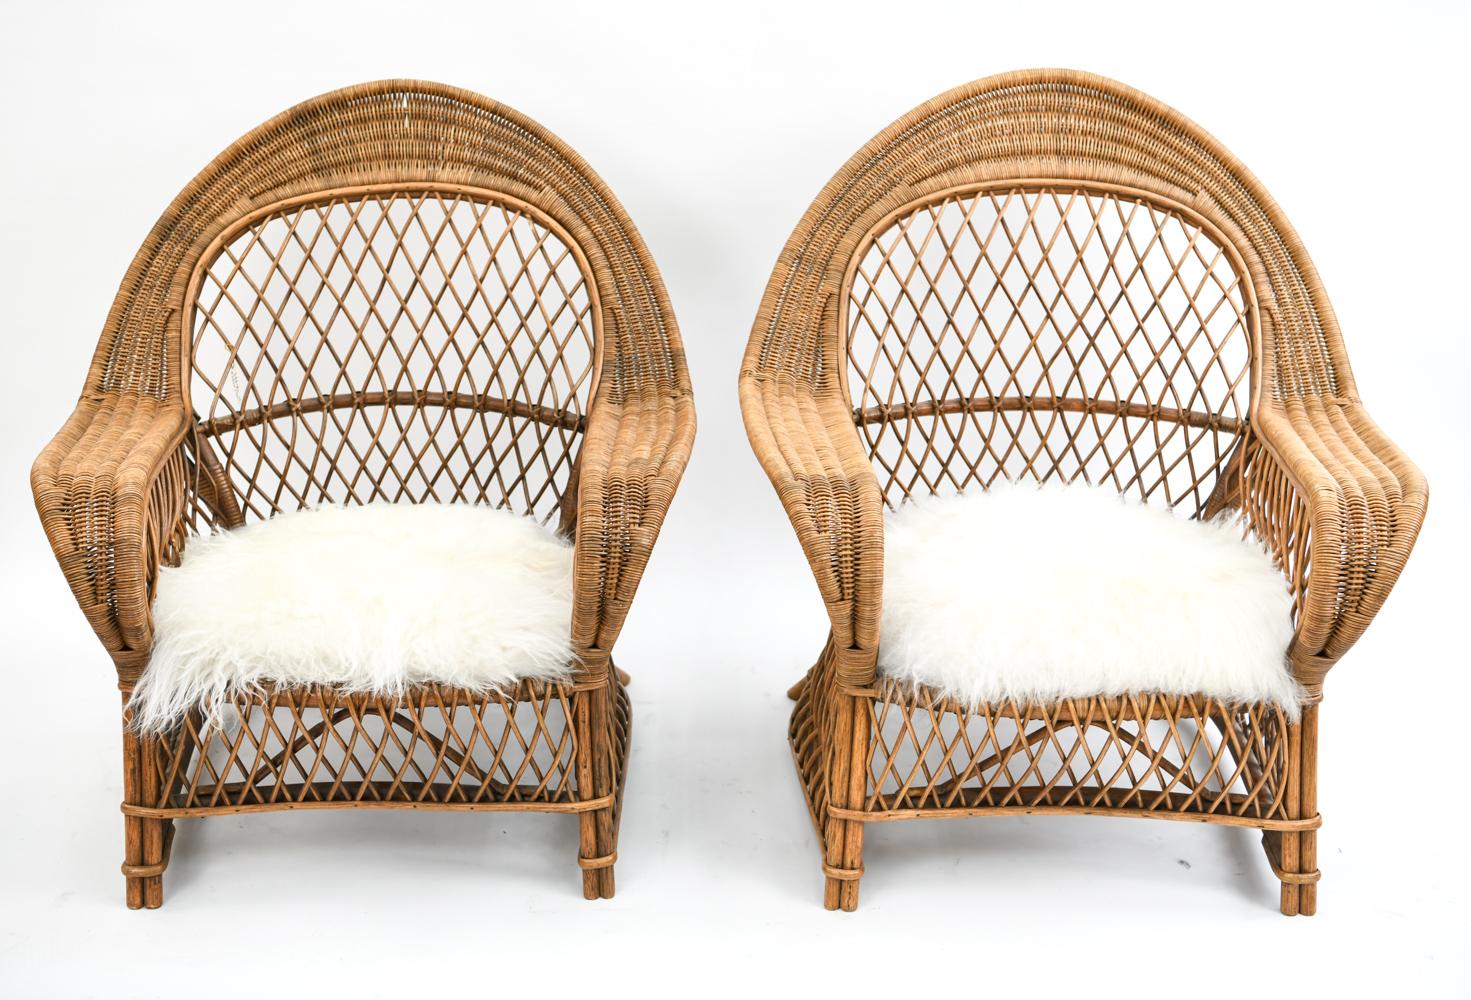 This is a fun pair of Danish rattan chairs, previously sold by well-renowned Danish furniture store, Anton Dam.